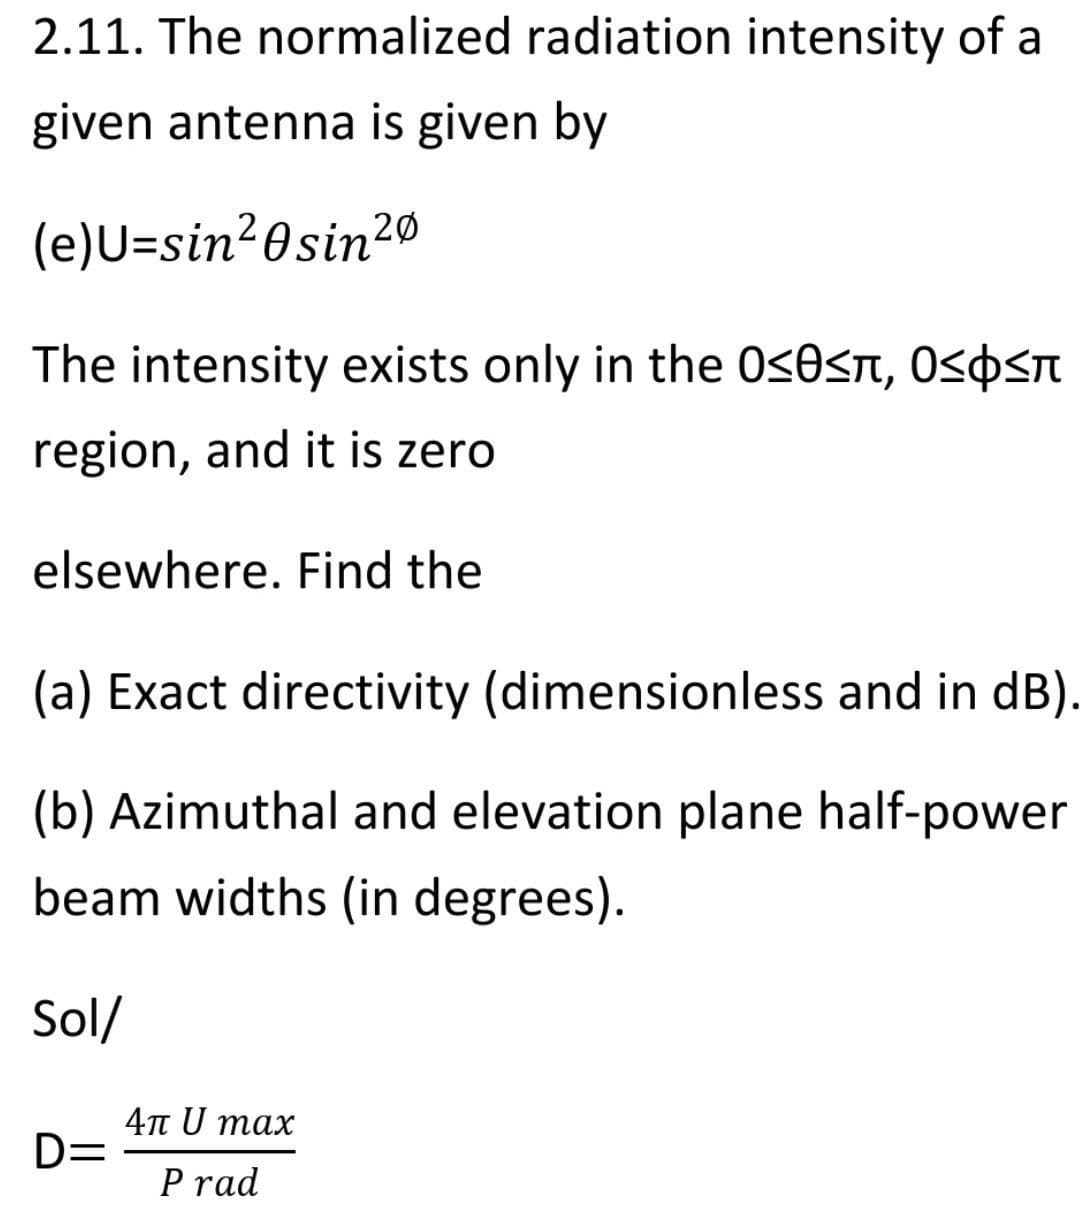 2.11. The normalized radiation intensity of a
given antenna is given by
(e)U=sin²0sin20
The intensity exists only in the 0<0<n, O<0<n
region, and it is zero
elsewhere. Find the
(a) Exact directivity (dimensionless and in dB).
(b) Azimuthal and elevation plane half-power
beam widths (in degrees).
Sol/
4n U max
D=
P rad
